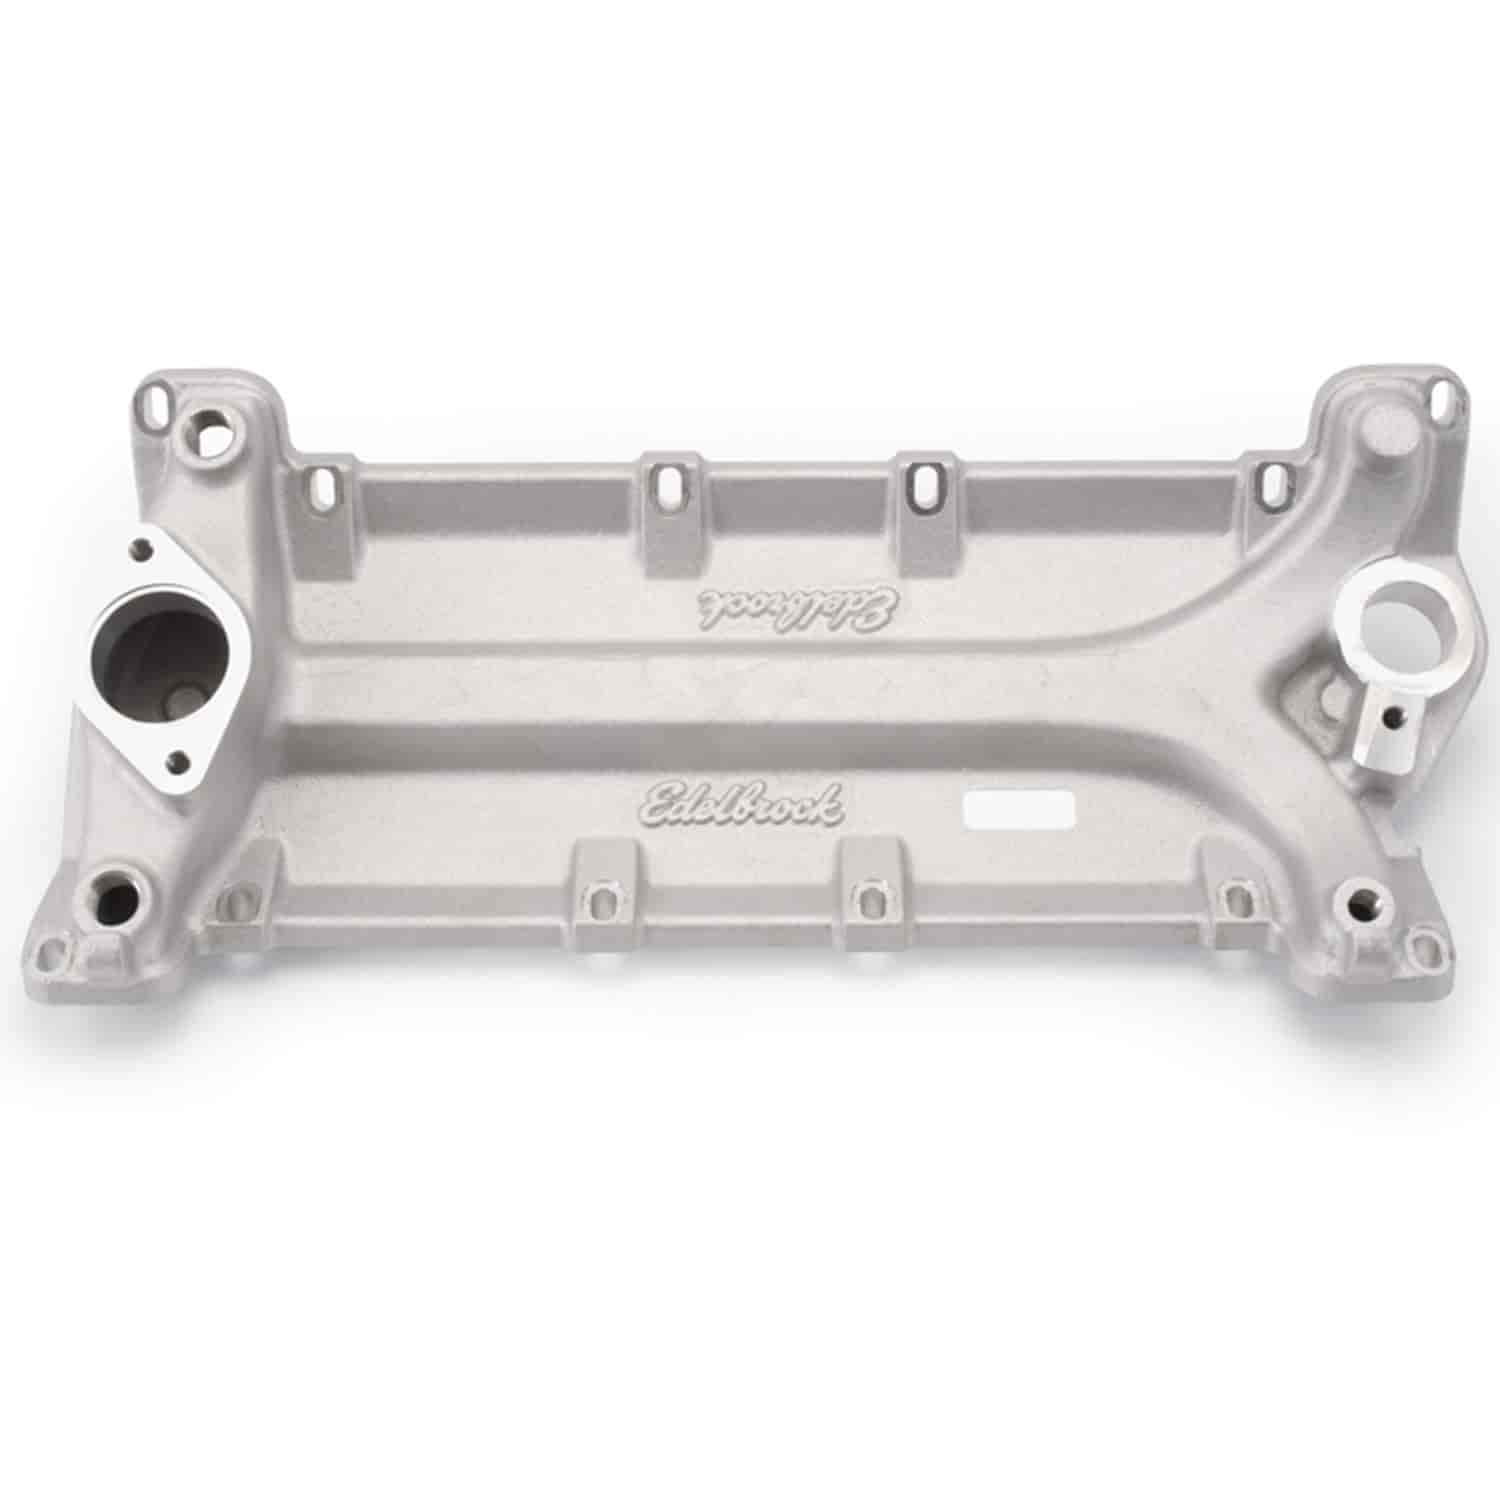 SB2 Valley Plate for Small Block Chevy